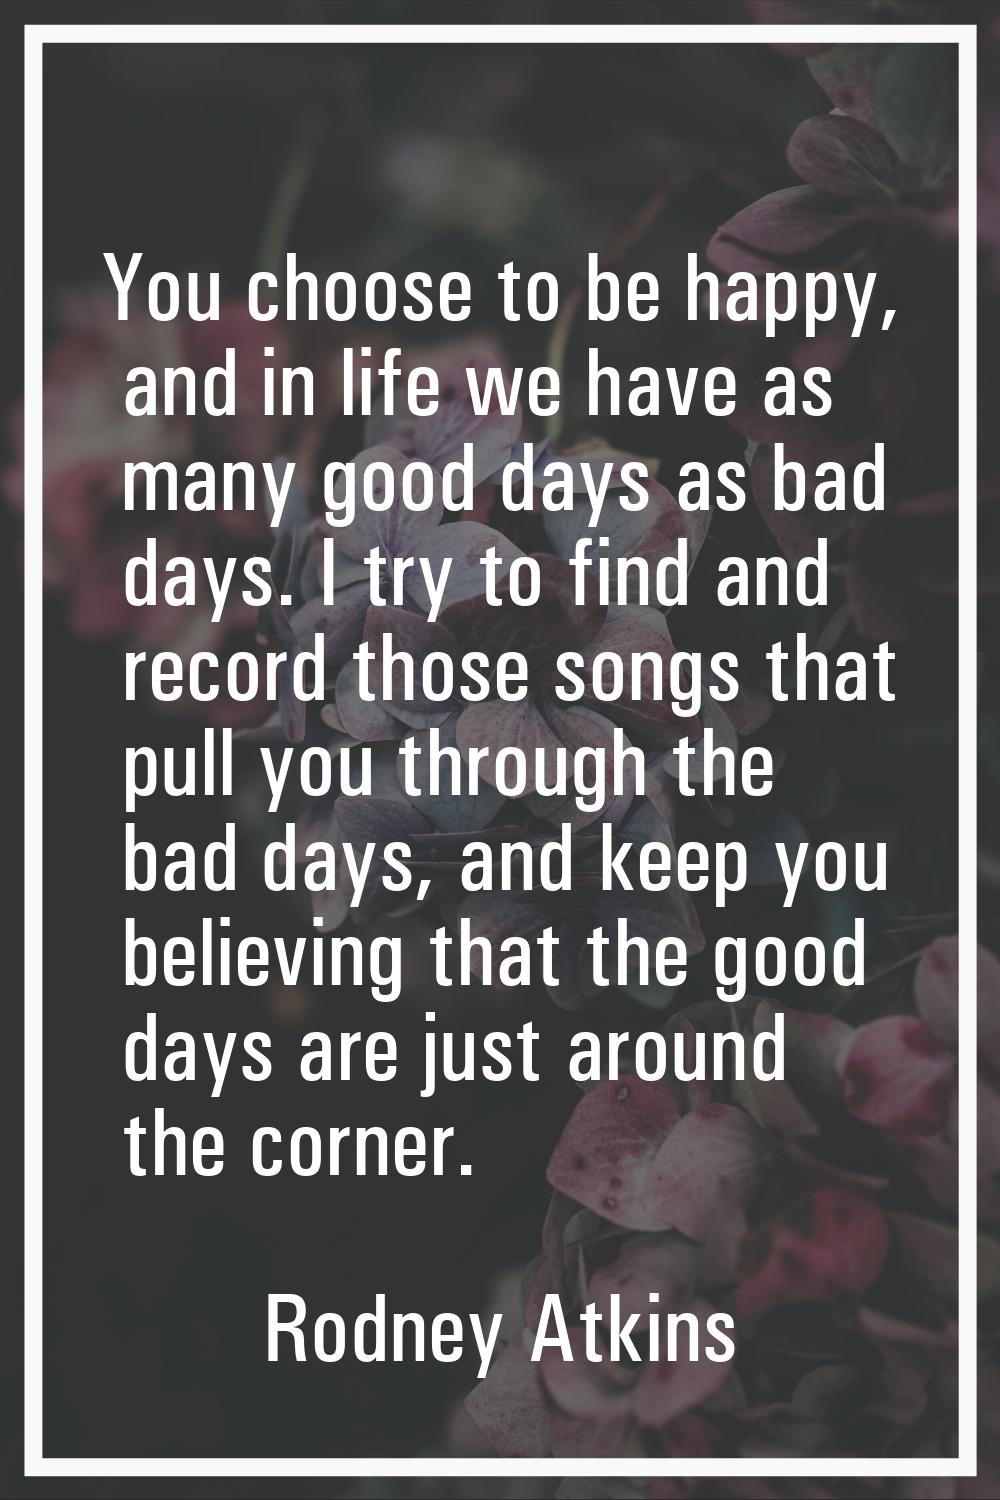 You choose to be happy, and in life we have as many good days as bad days. I try to find and record